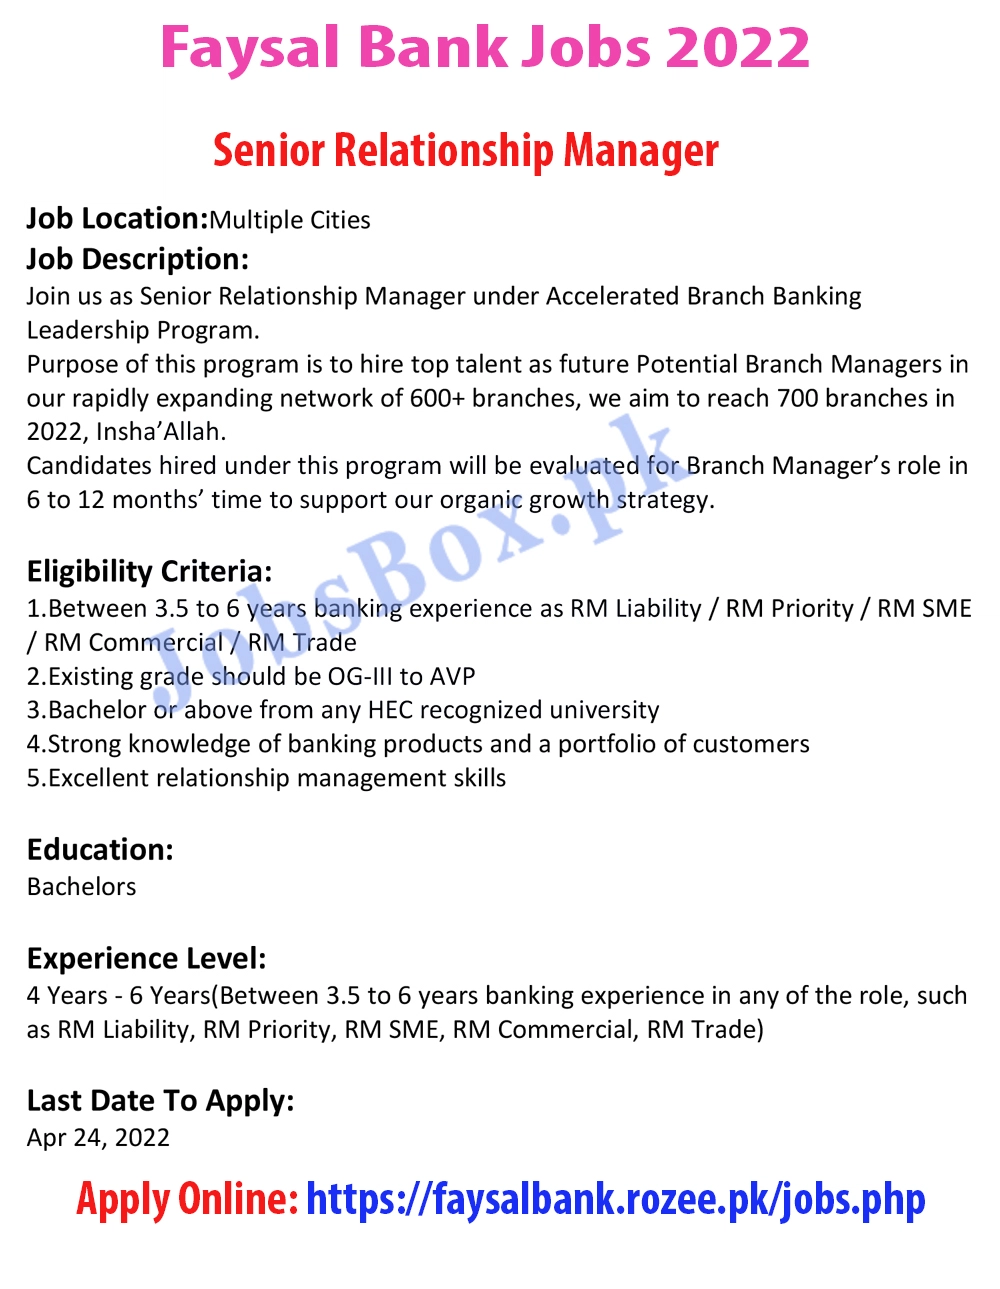 Faysal Bank Jobs 2022 for Senior Relationship Managers 